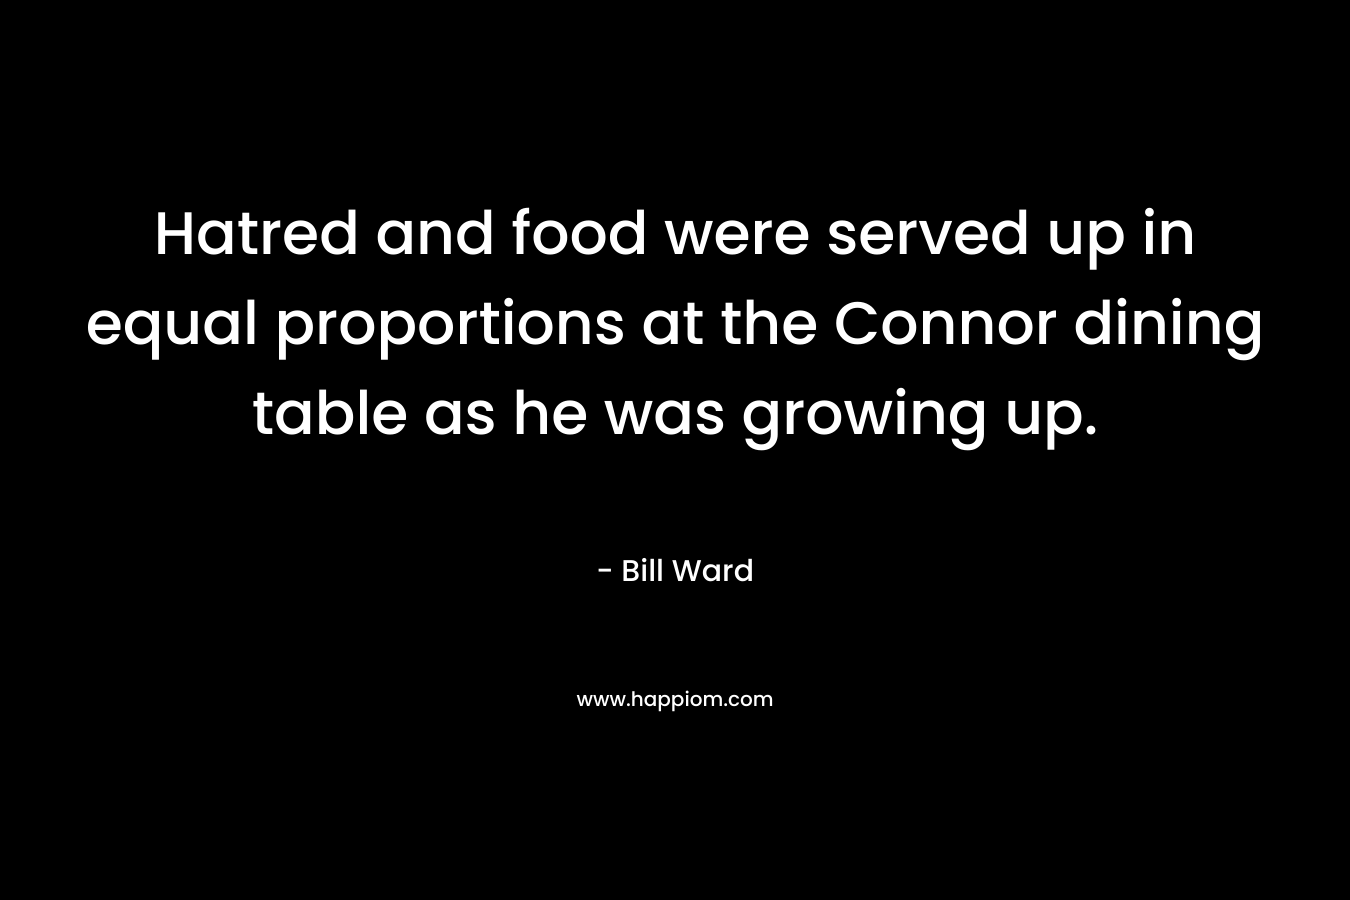 Hatred and food were served up in equal proportions at the Connor dining table as he was growing up.